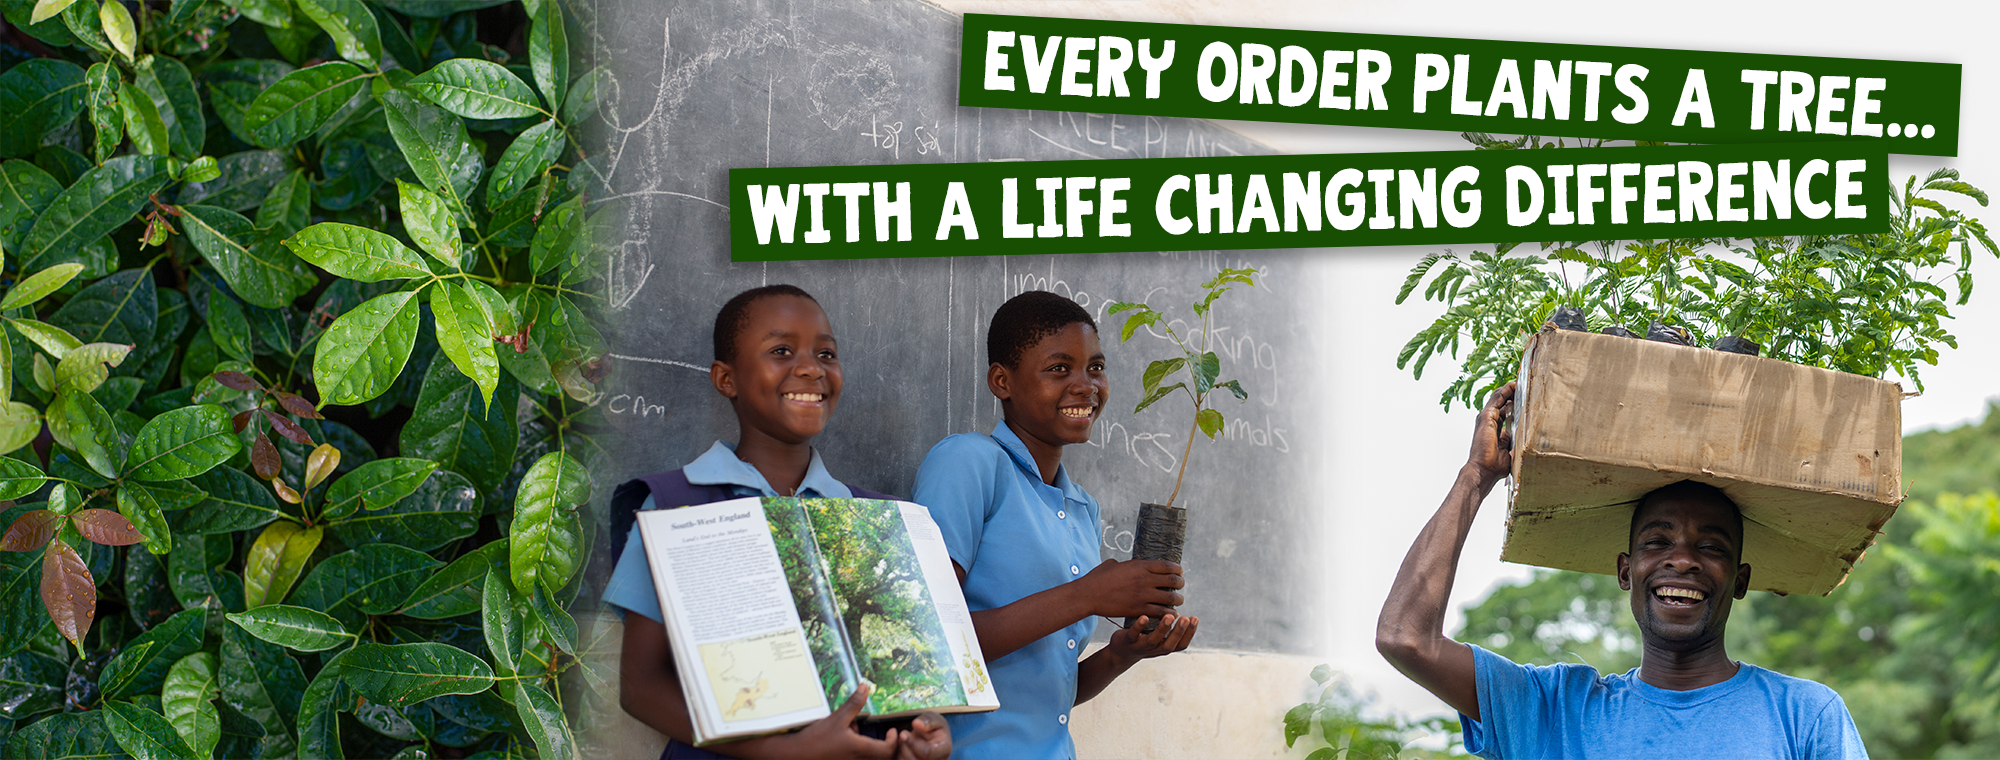 <h2>Every Order Plants A Tree</h2><p>We are partnered with Fisherman's Rest charity in Malawi who are transforming communities through Tree Planting to manage water and crops. Read more...